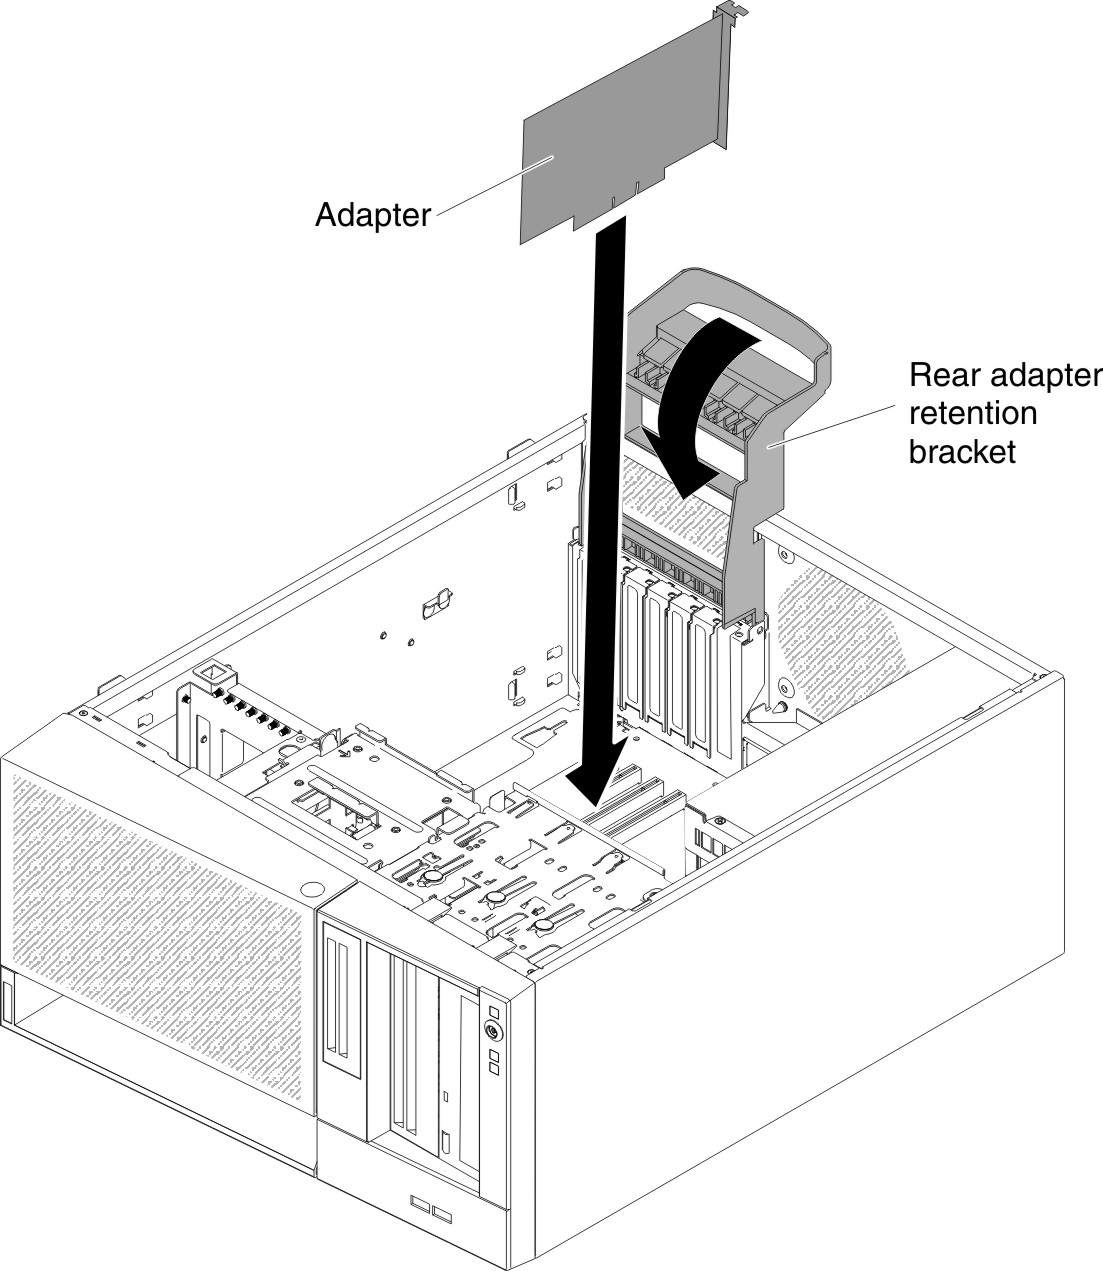 Adapter installation for 5U server model with hot-swap power supplies